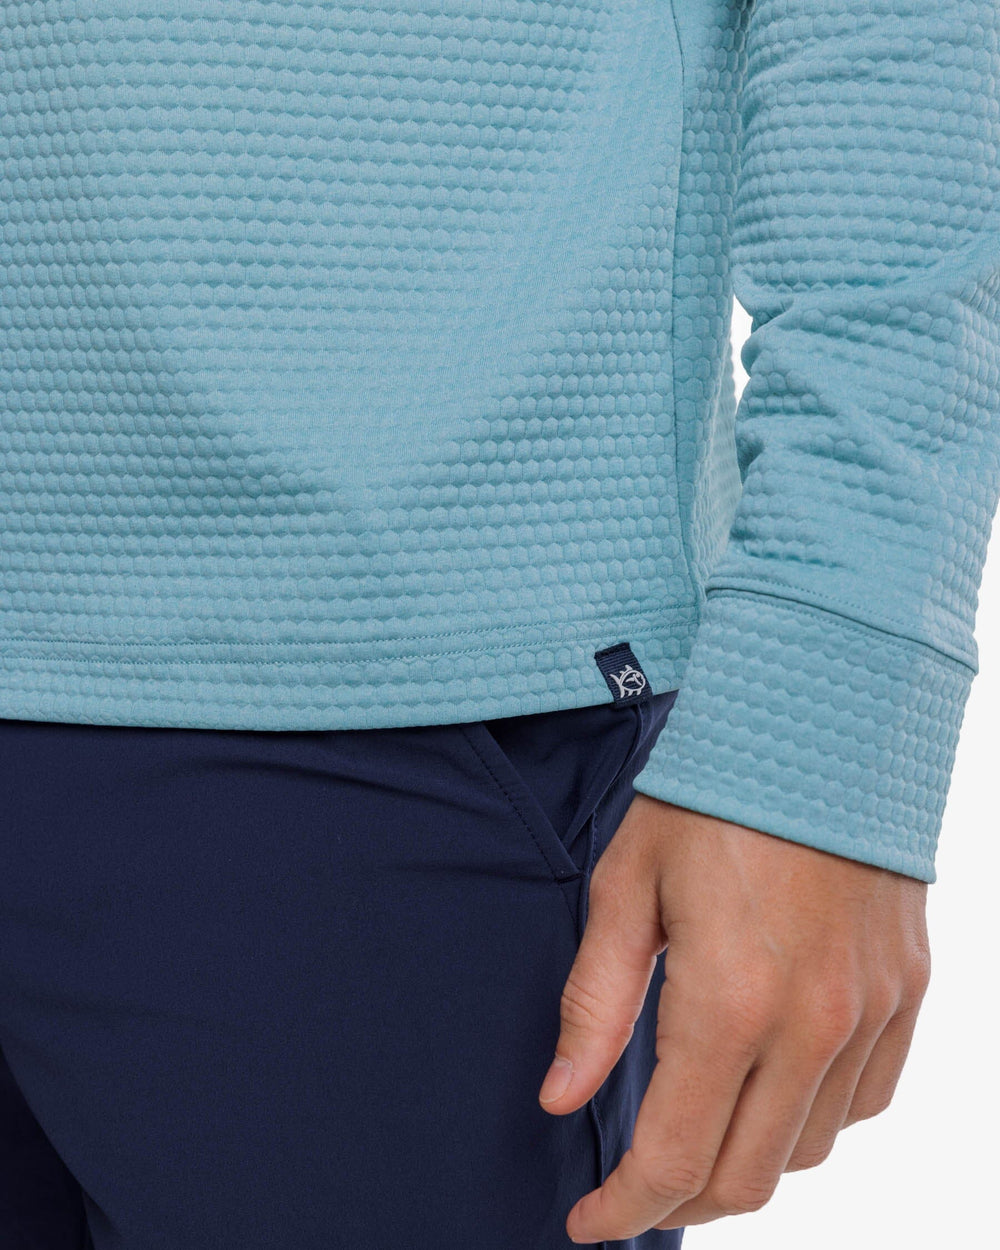 The label view of the Southern Tide Scuttle Heather Performance Quarter Zip Hoodie by Southern Tide - Heather Ocean Teal